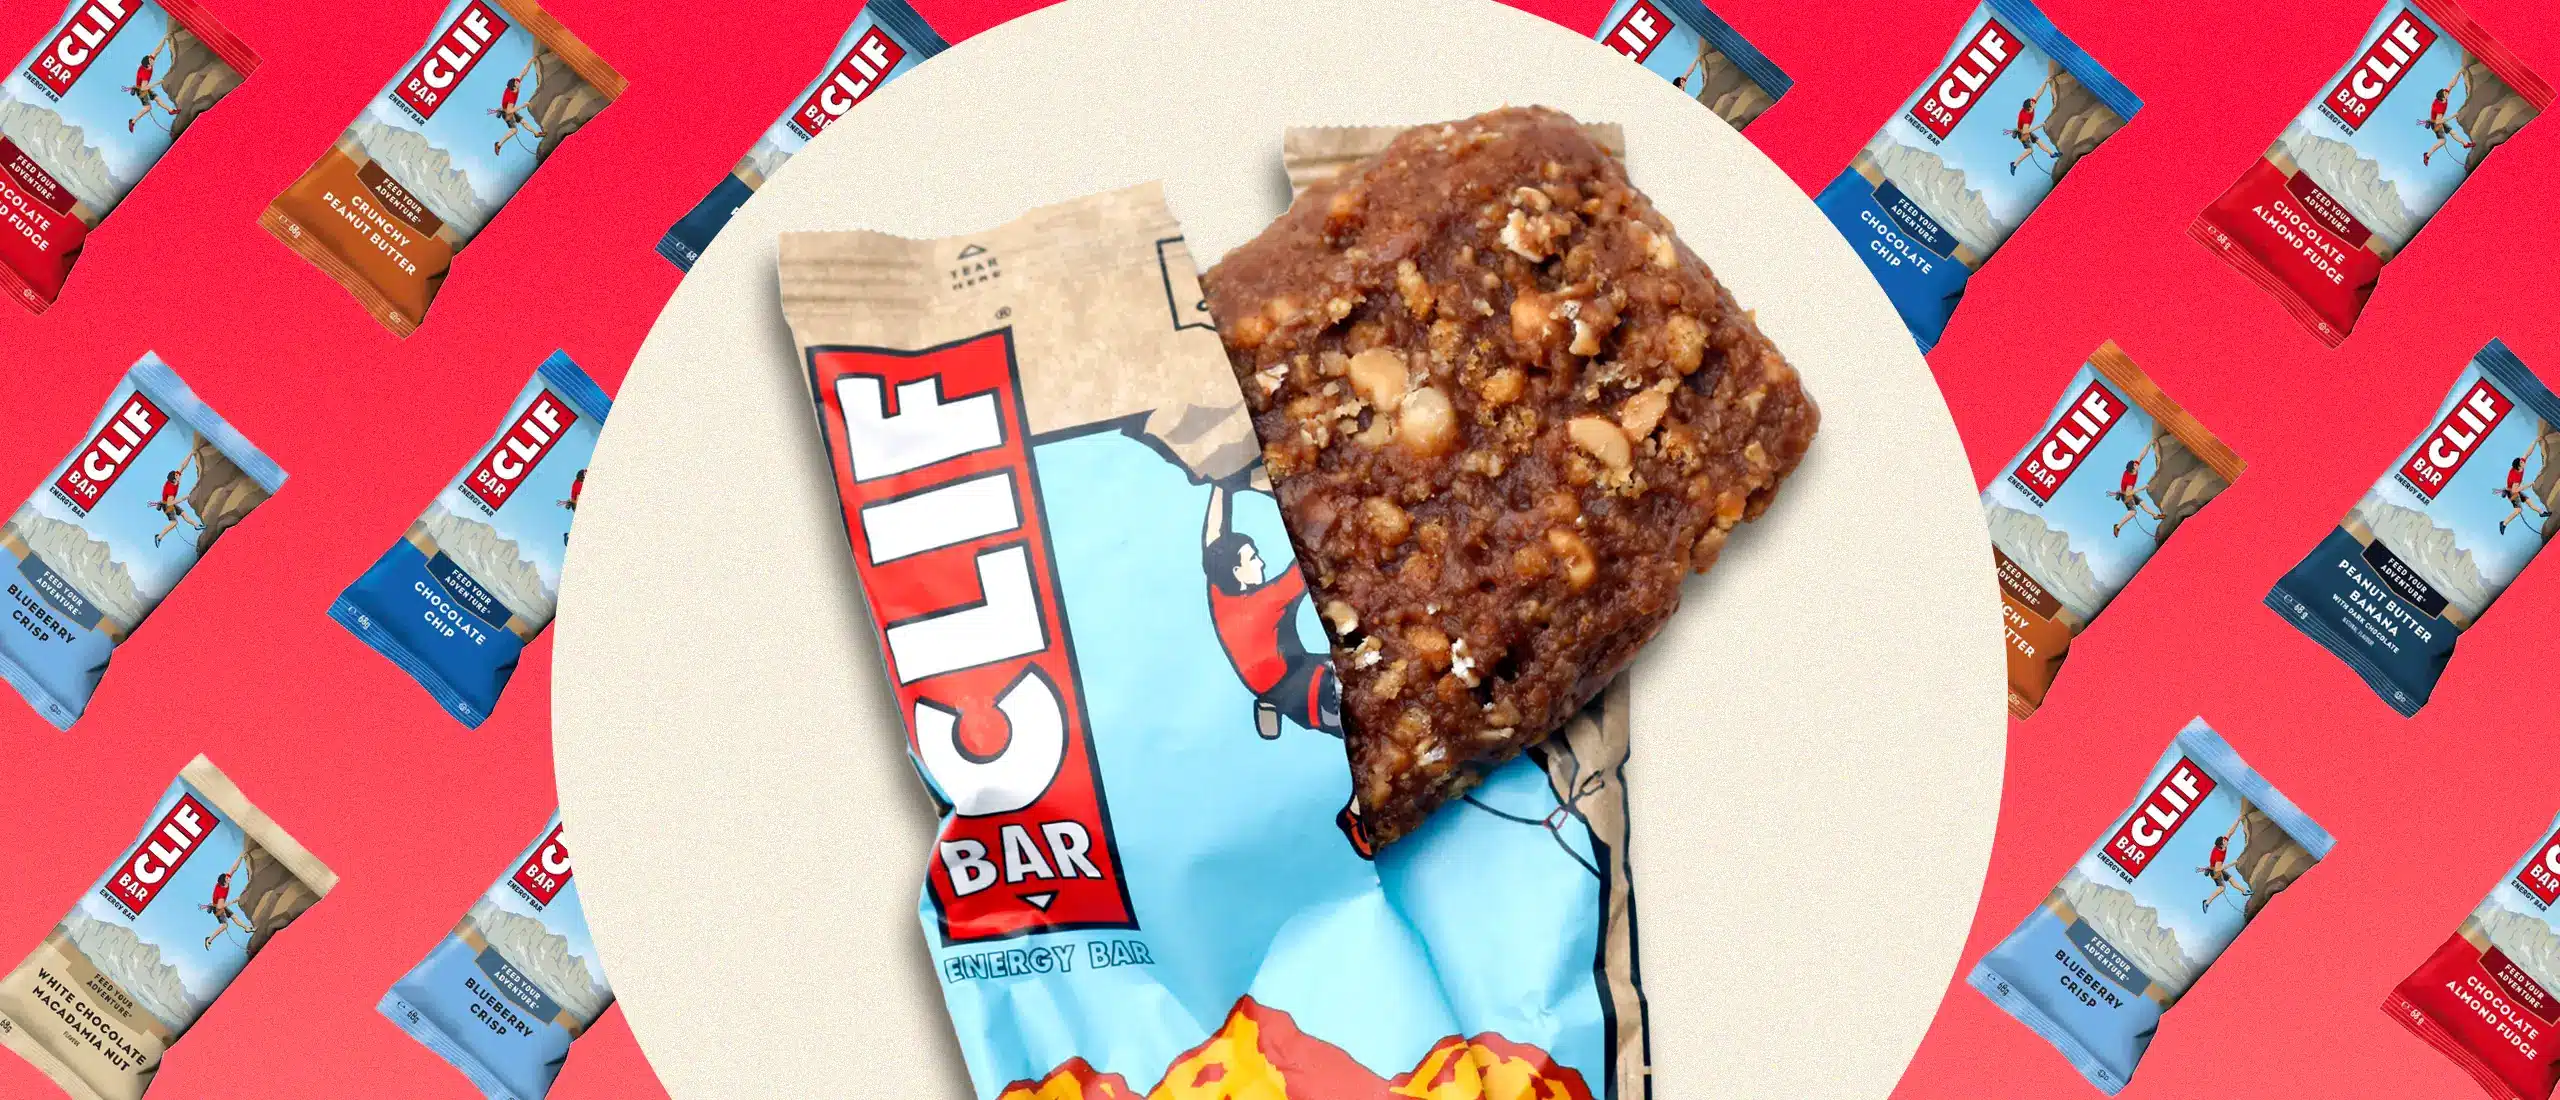 An open clif bar with more clif bars in the background